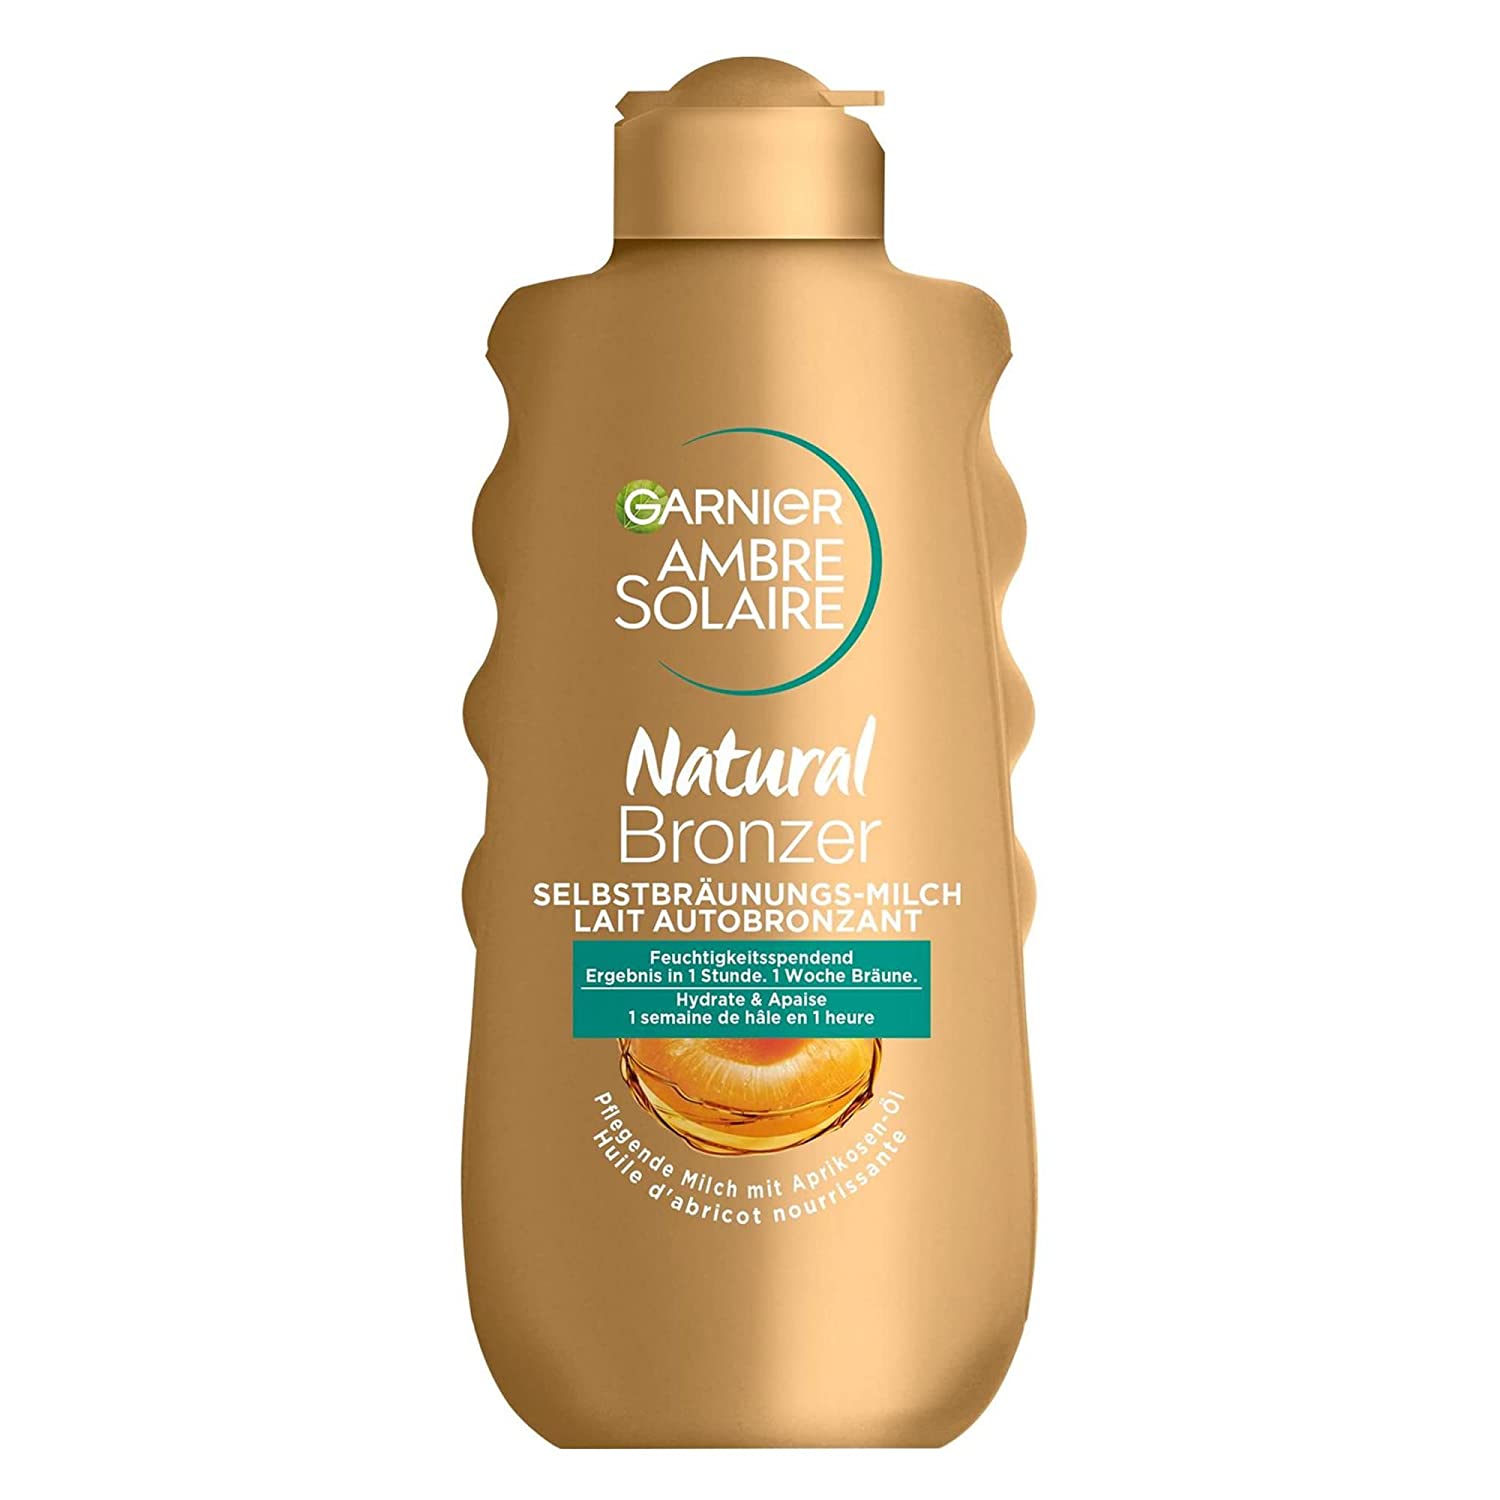 Garnier Self-Tanning Milk, Bronzer Lotion for a Natural and Stain Free Tan, Ambre Solaire Natural Bronzer Milk, 1 x 150 ml